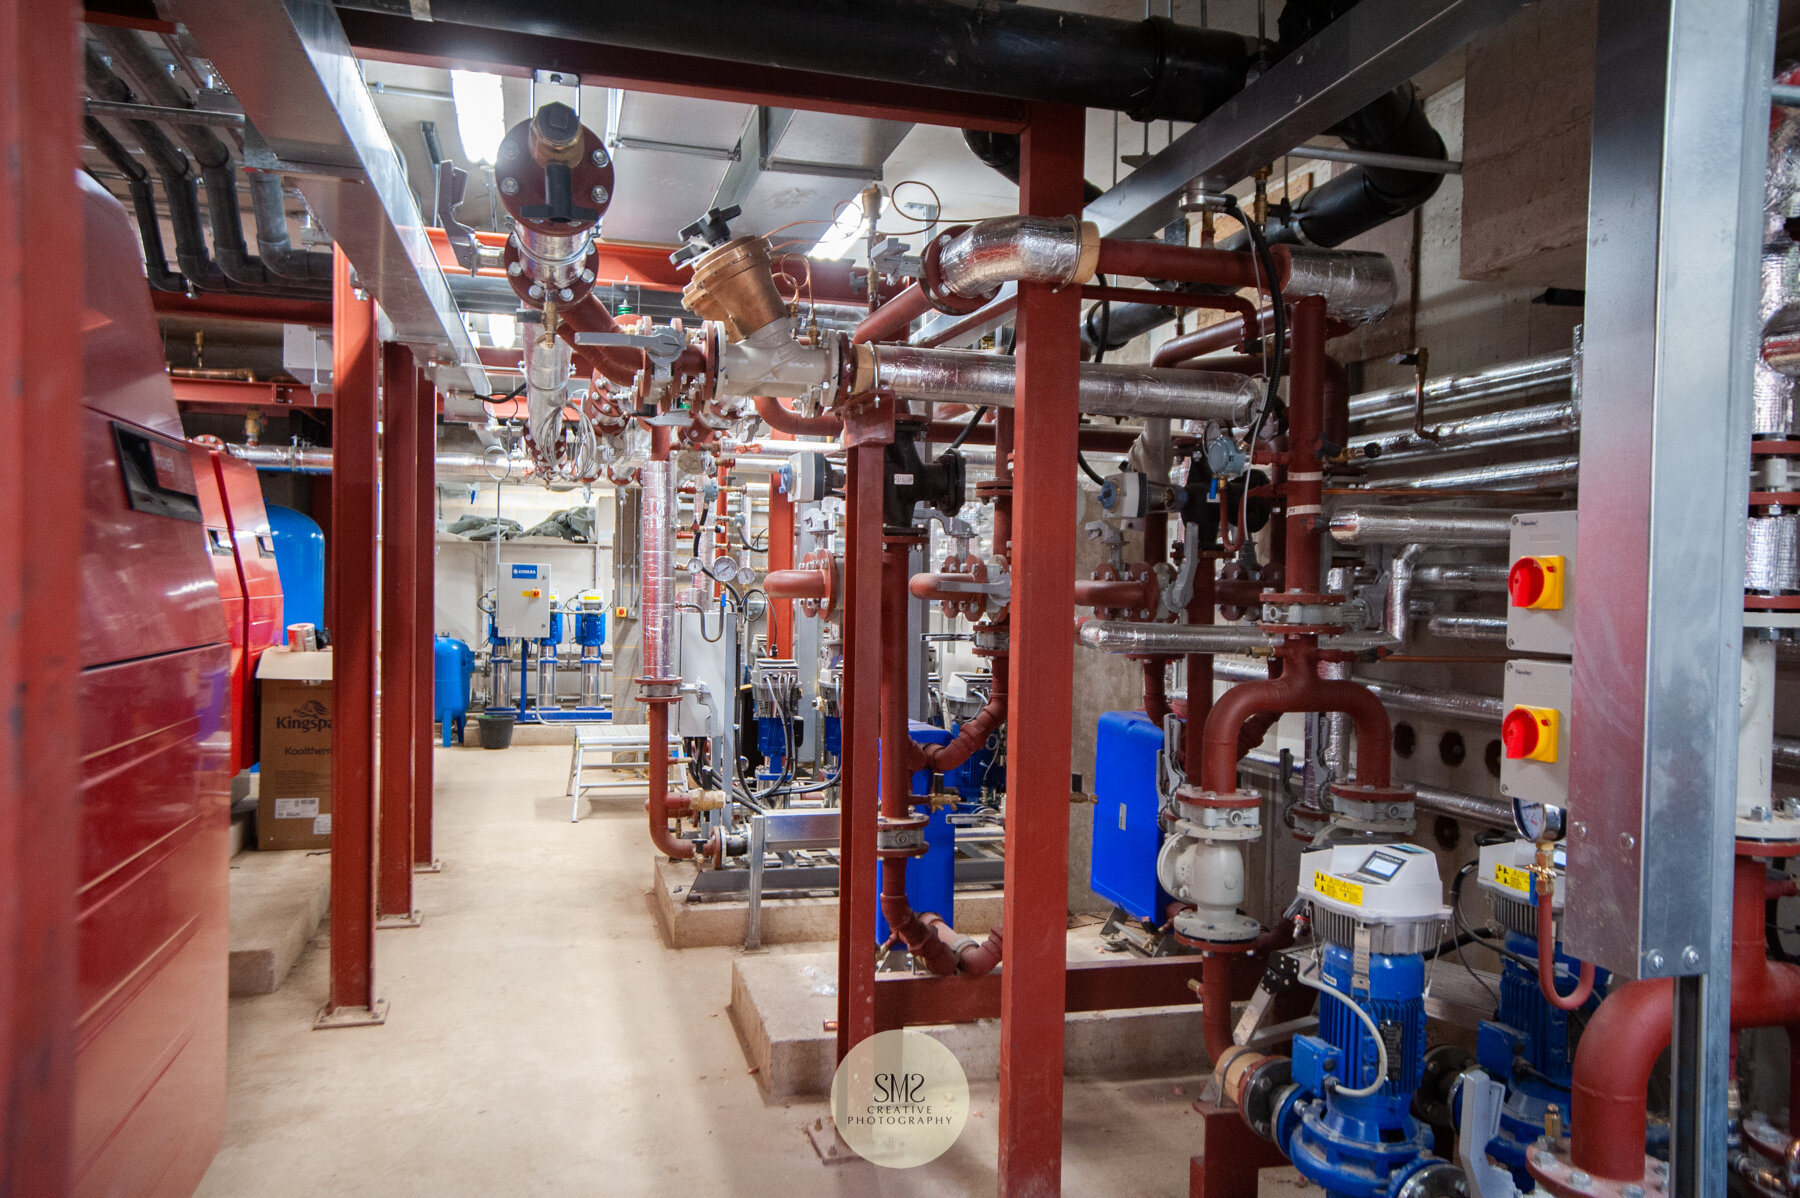  The plant room where all the heating and water is housed very neatly for all three blocks. 